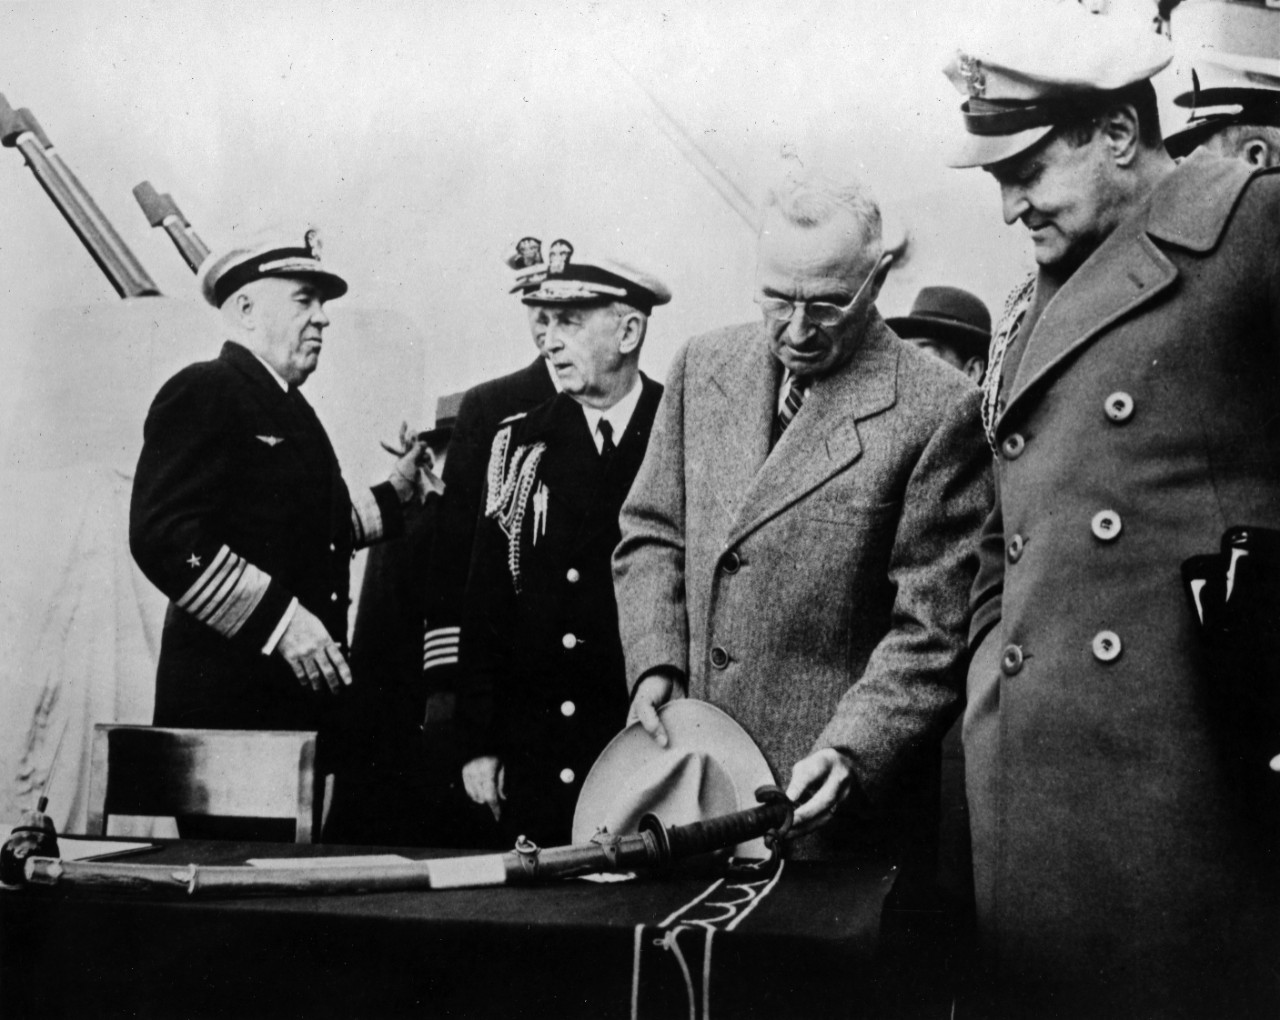 President Harry S. Truman reviews a Japanese sword on the USS Missouri (BB-63) surrender table. Present: (left to right): Admiral Jonas H. Ingram, USN; Fleet Admiral William D. Leahy, USN, (the President's Chief of Staff); President Harry S. Truman; and Brigadier General Vaughn, USA. Original photo from collection S-423.